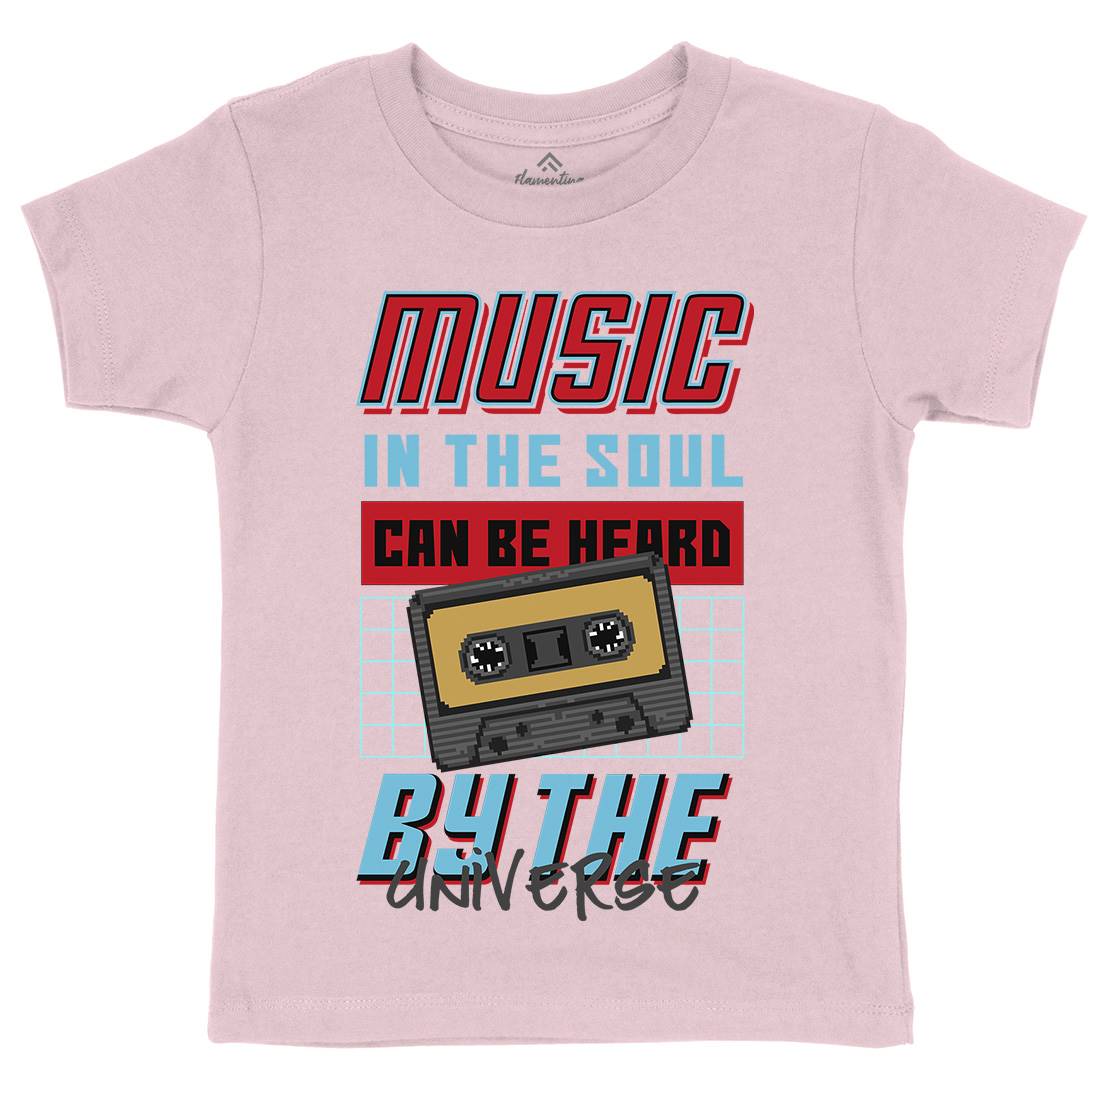 In The Soul Can Be Heard By The Universe Kids Organic Crew Neck T-Shirt Music B935